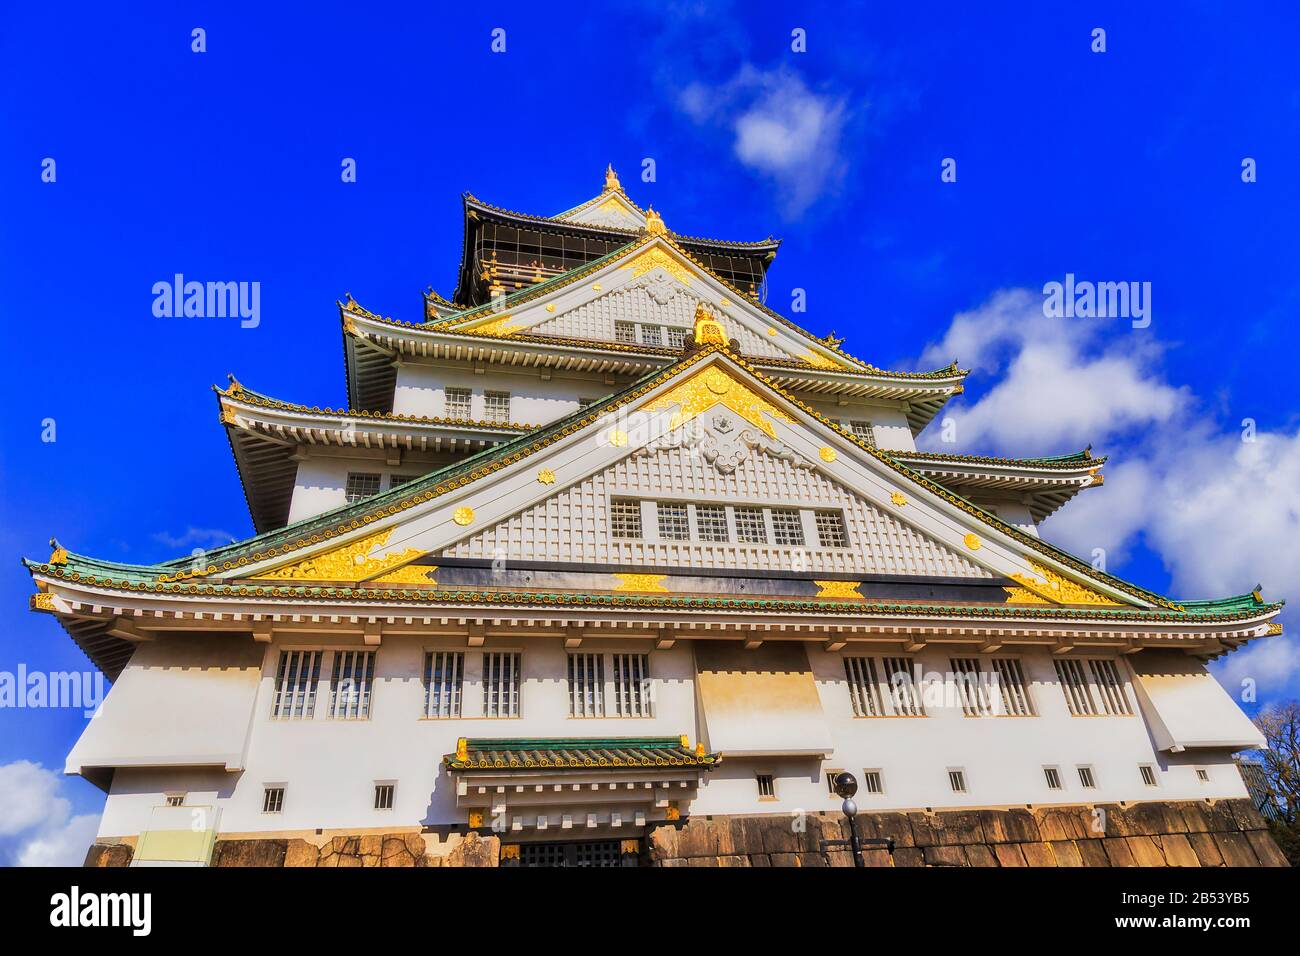 Bright lit facade of spectacular historic castle tower in Osaka city of Japan against blue sky. Stock Photo